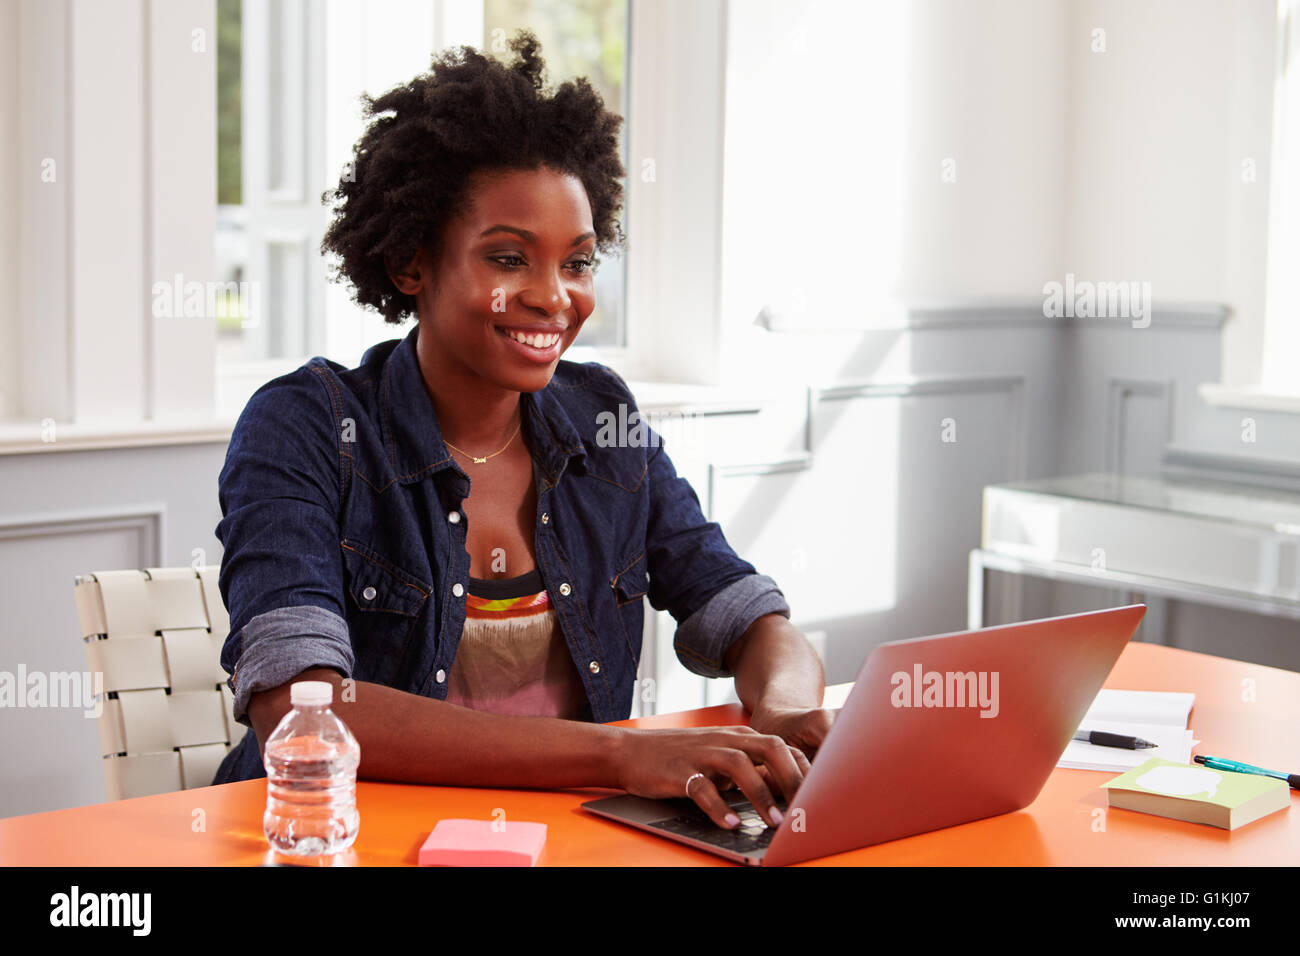 Young black woman using laptop computer at a desk, close-up Stock Photo